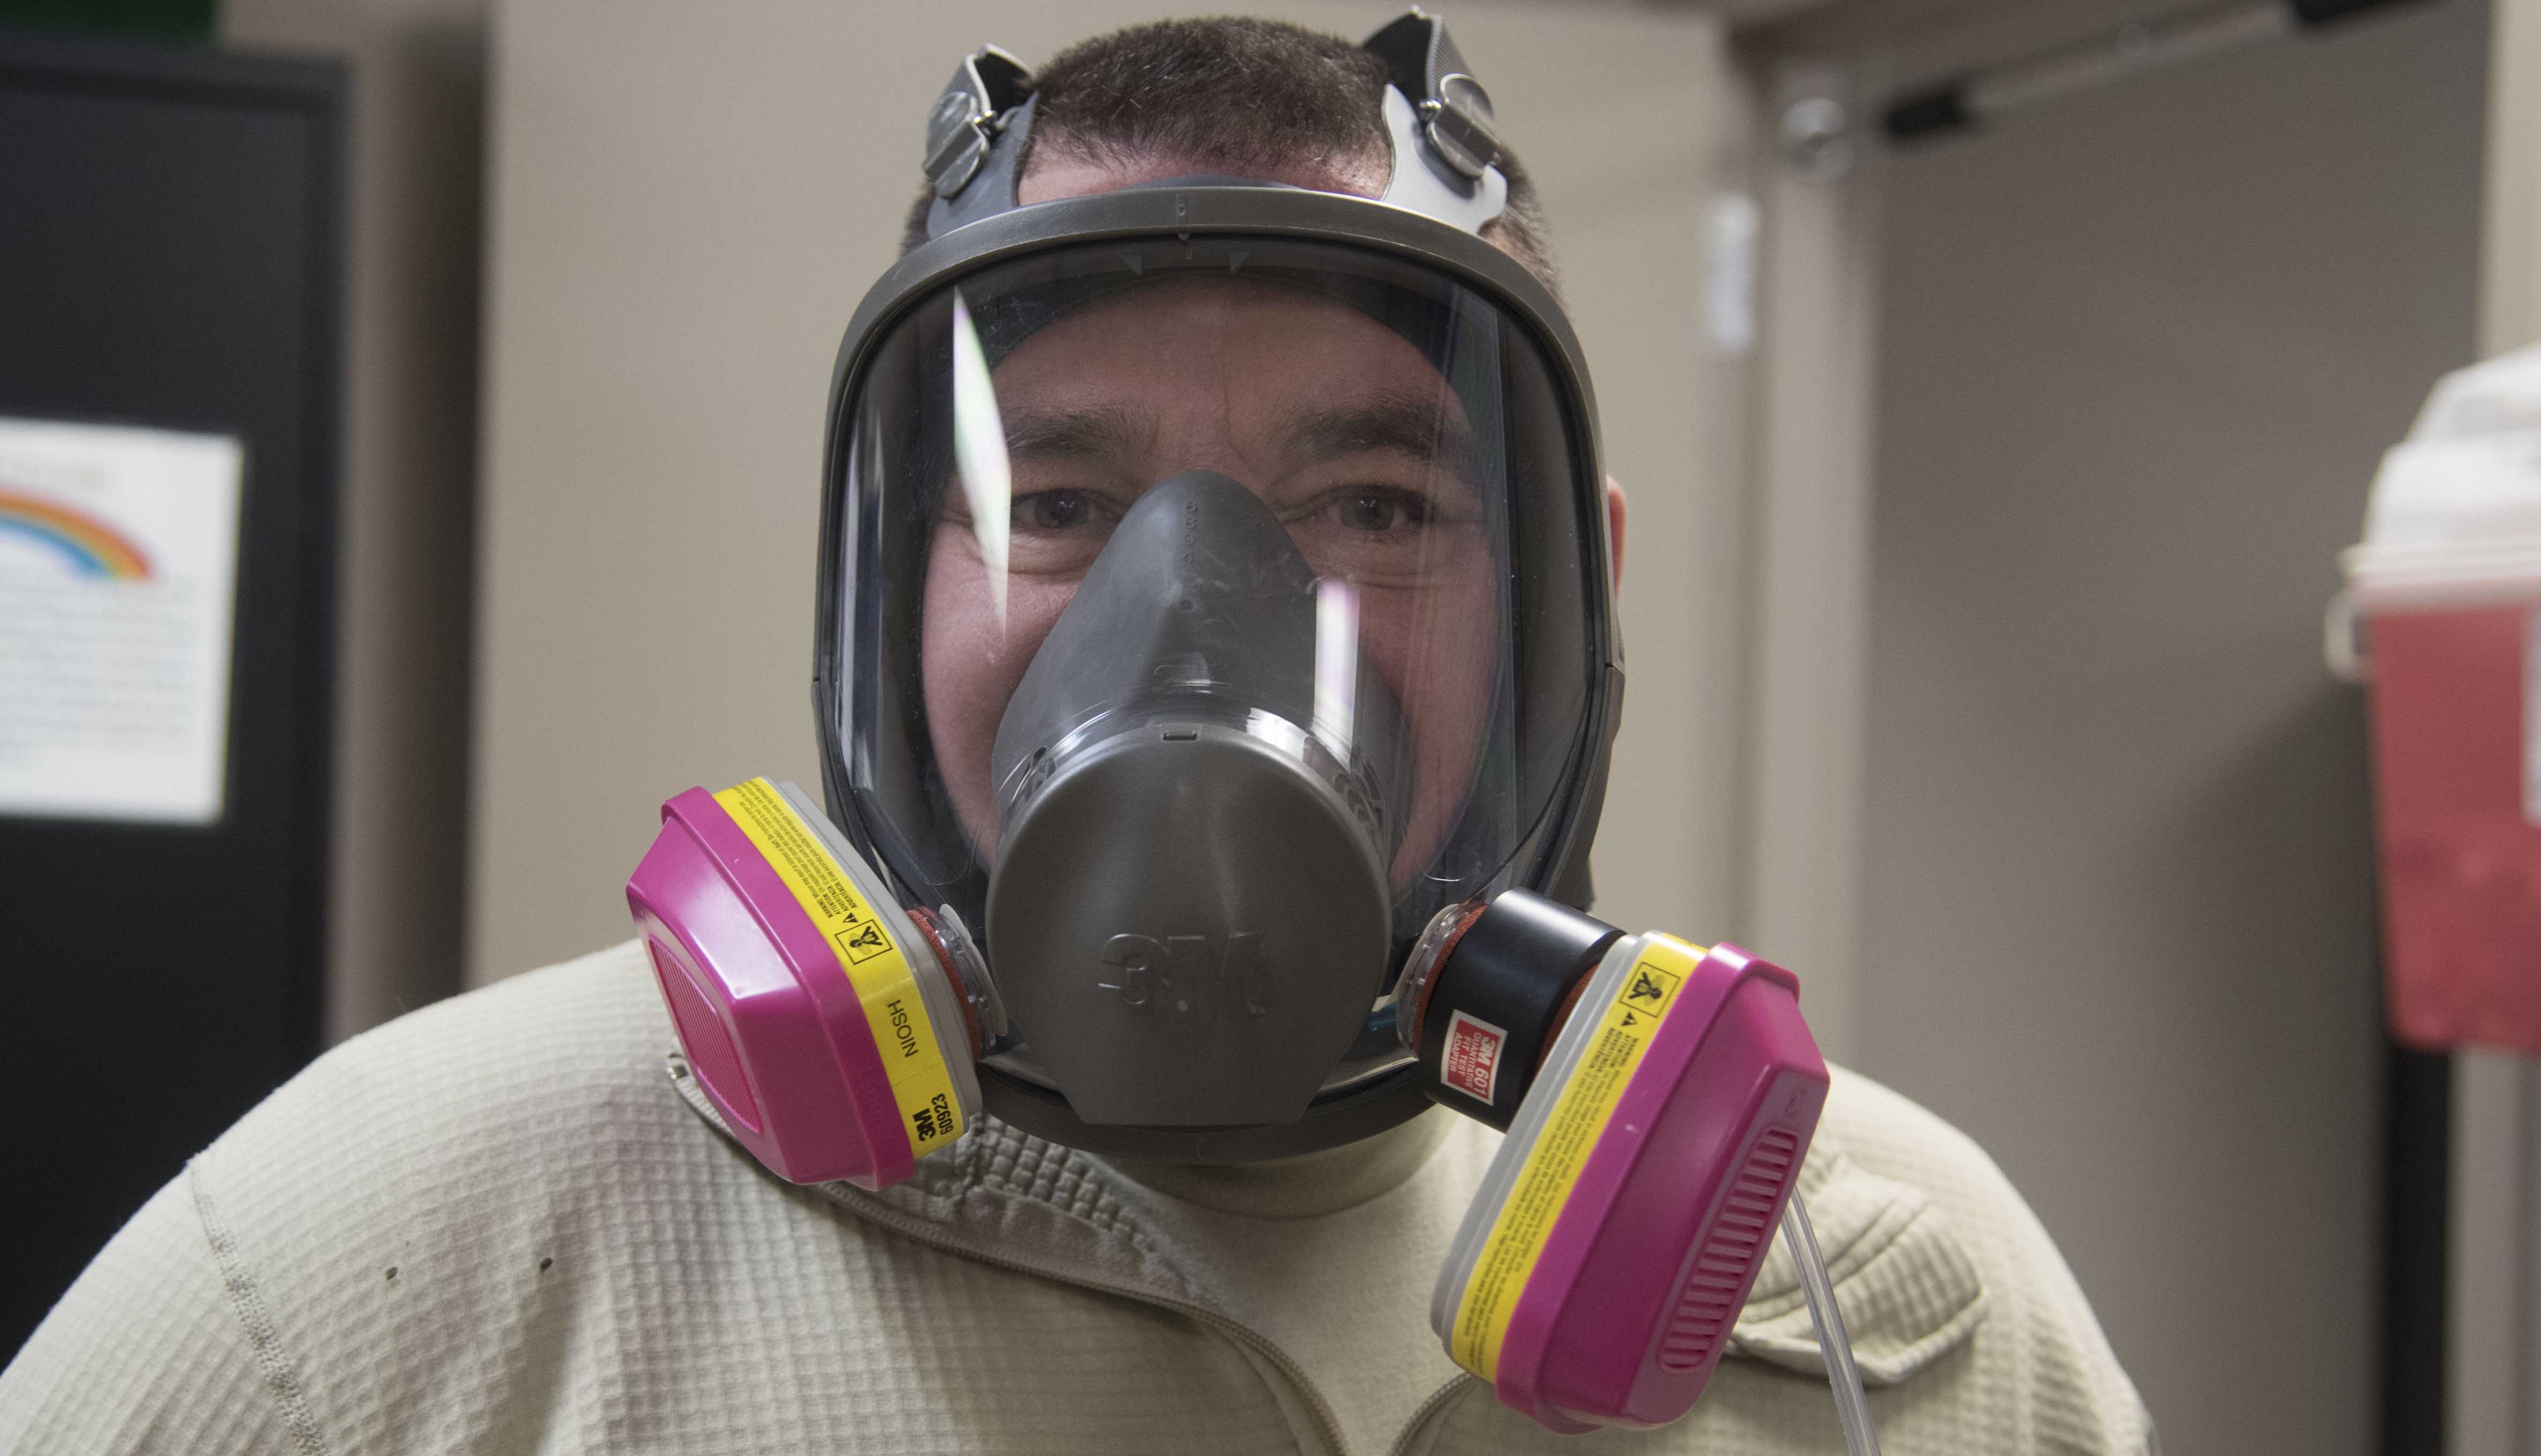 Global Gas Masks Market 2018-2023 Consumption, Suppliers, Industry Rivalry, Types, Applications, Regions, Opportunities, Drivers, and Forecast